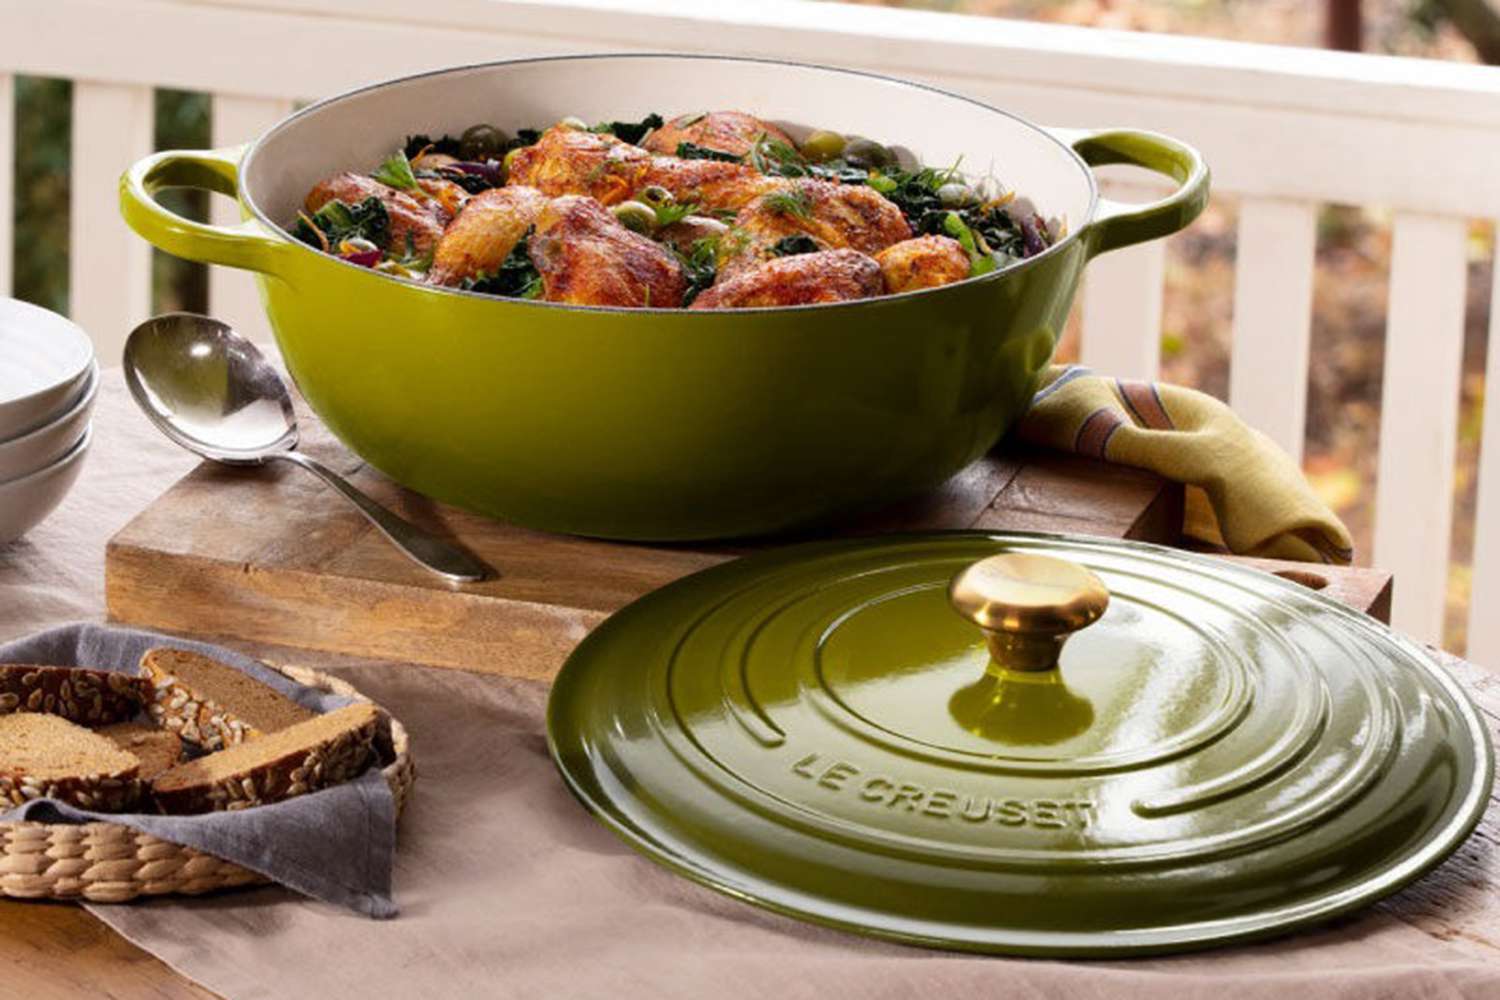 Score 20% Off Cookware At the Great Jones Valentine's Day Sale